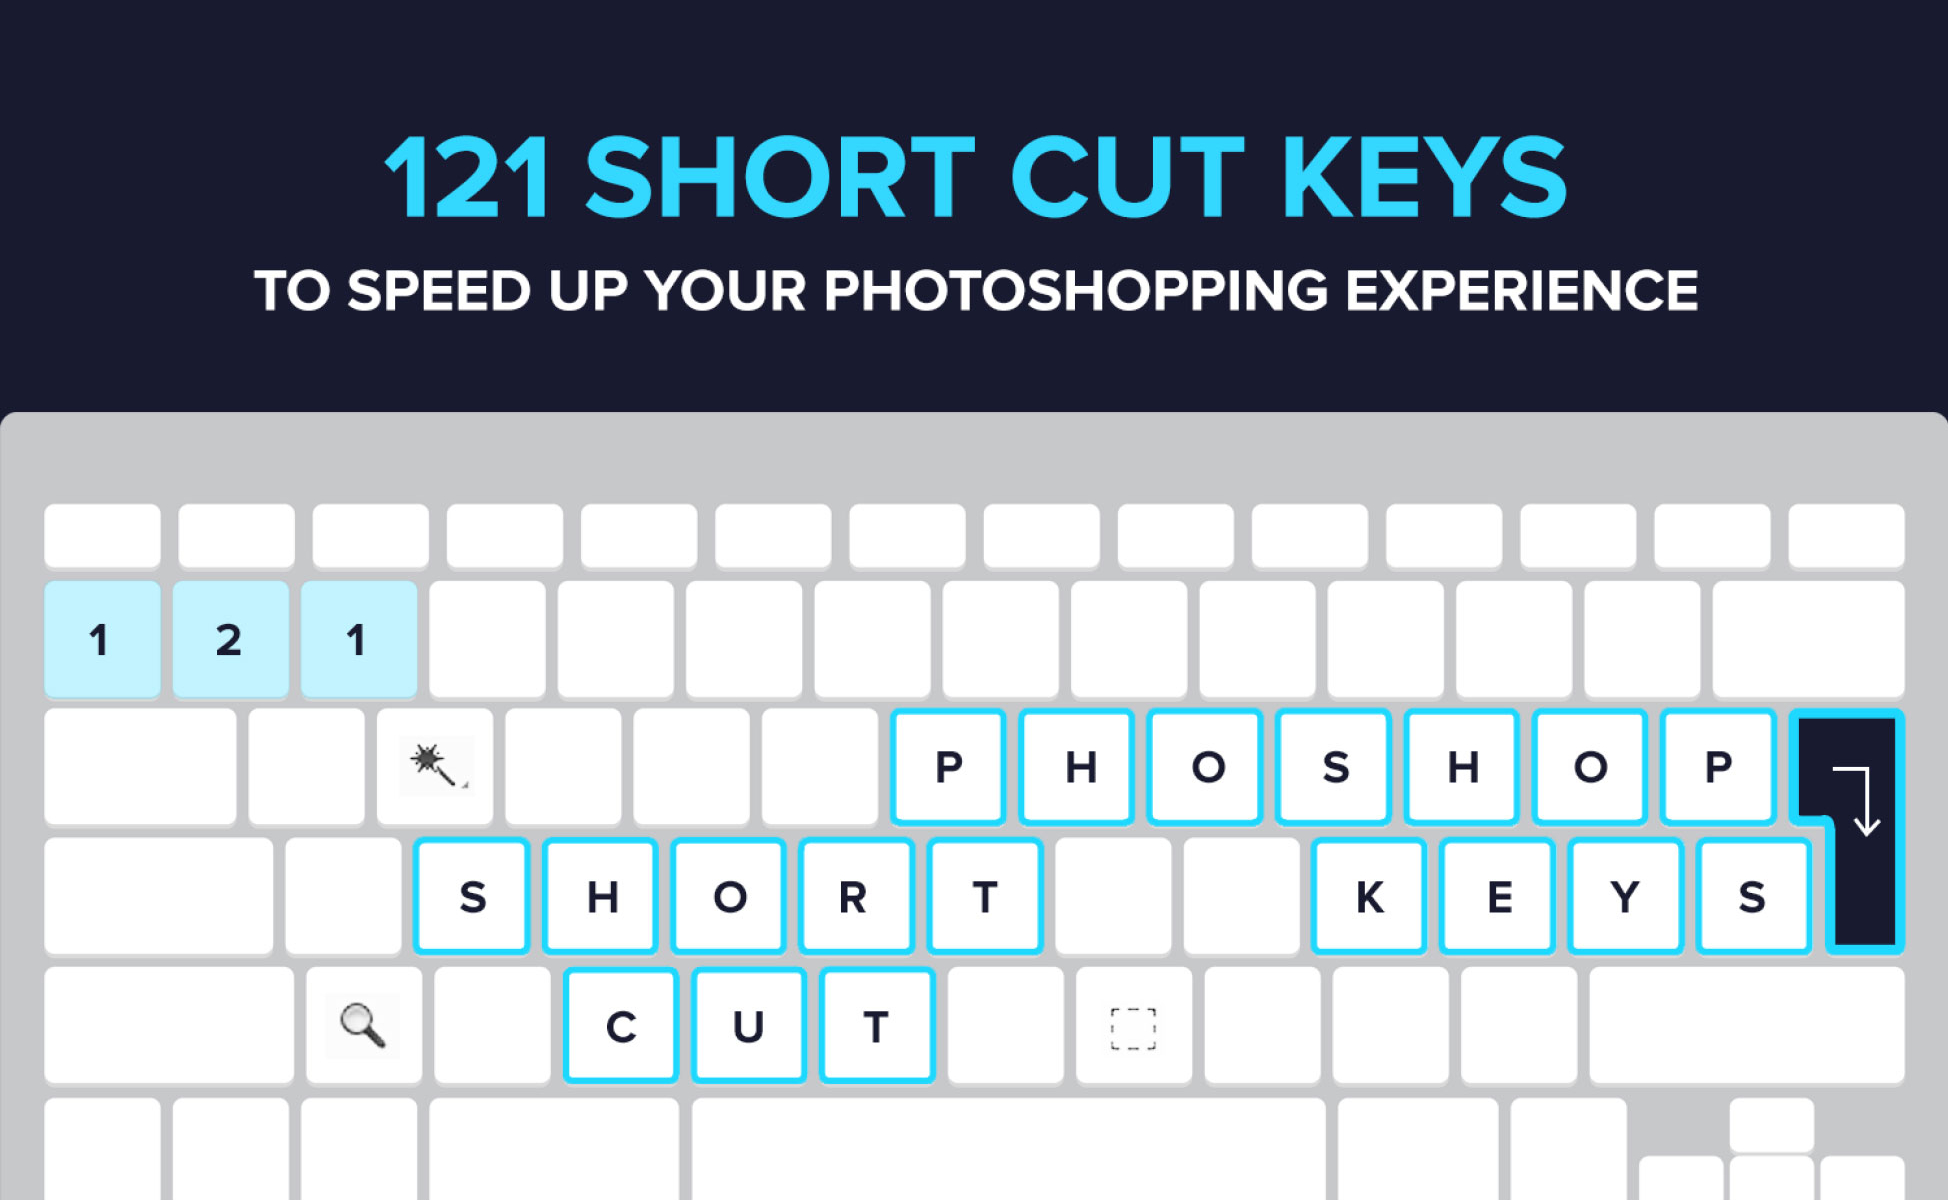 121 Short cut keys to speed up your Photoshop retouching experience